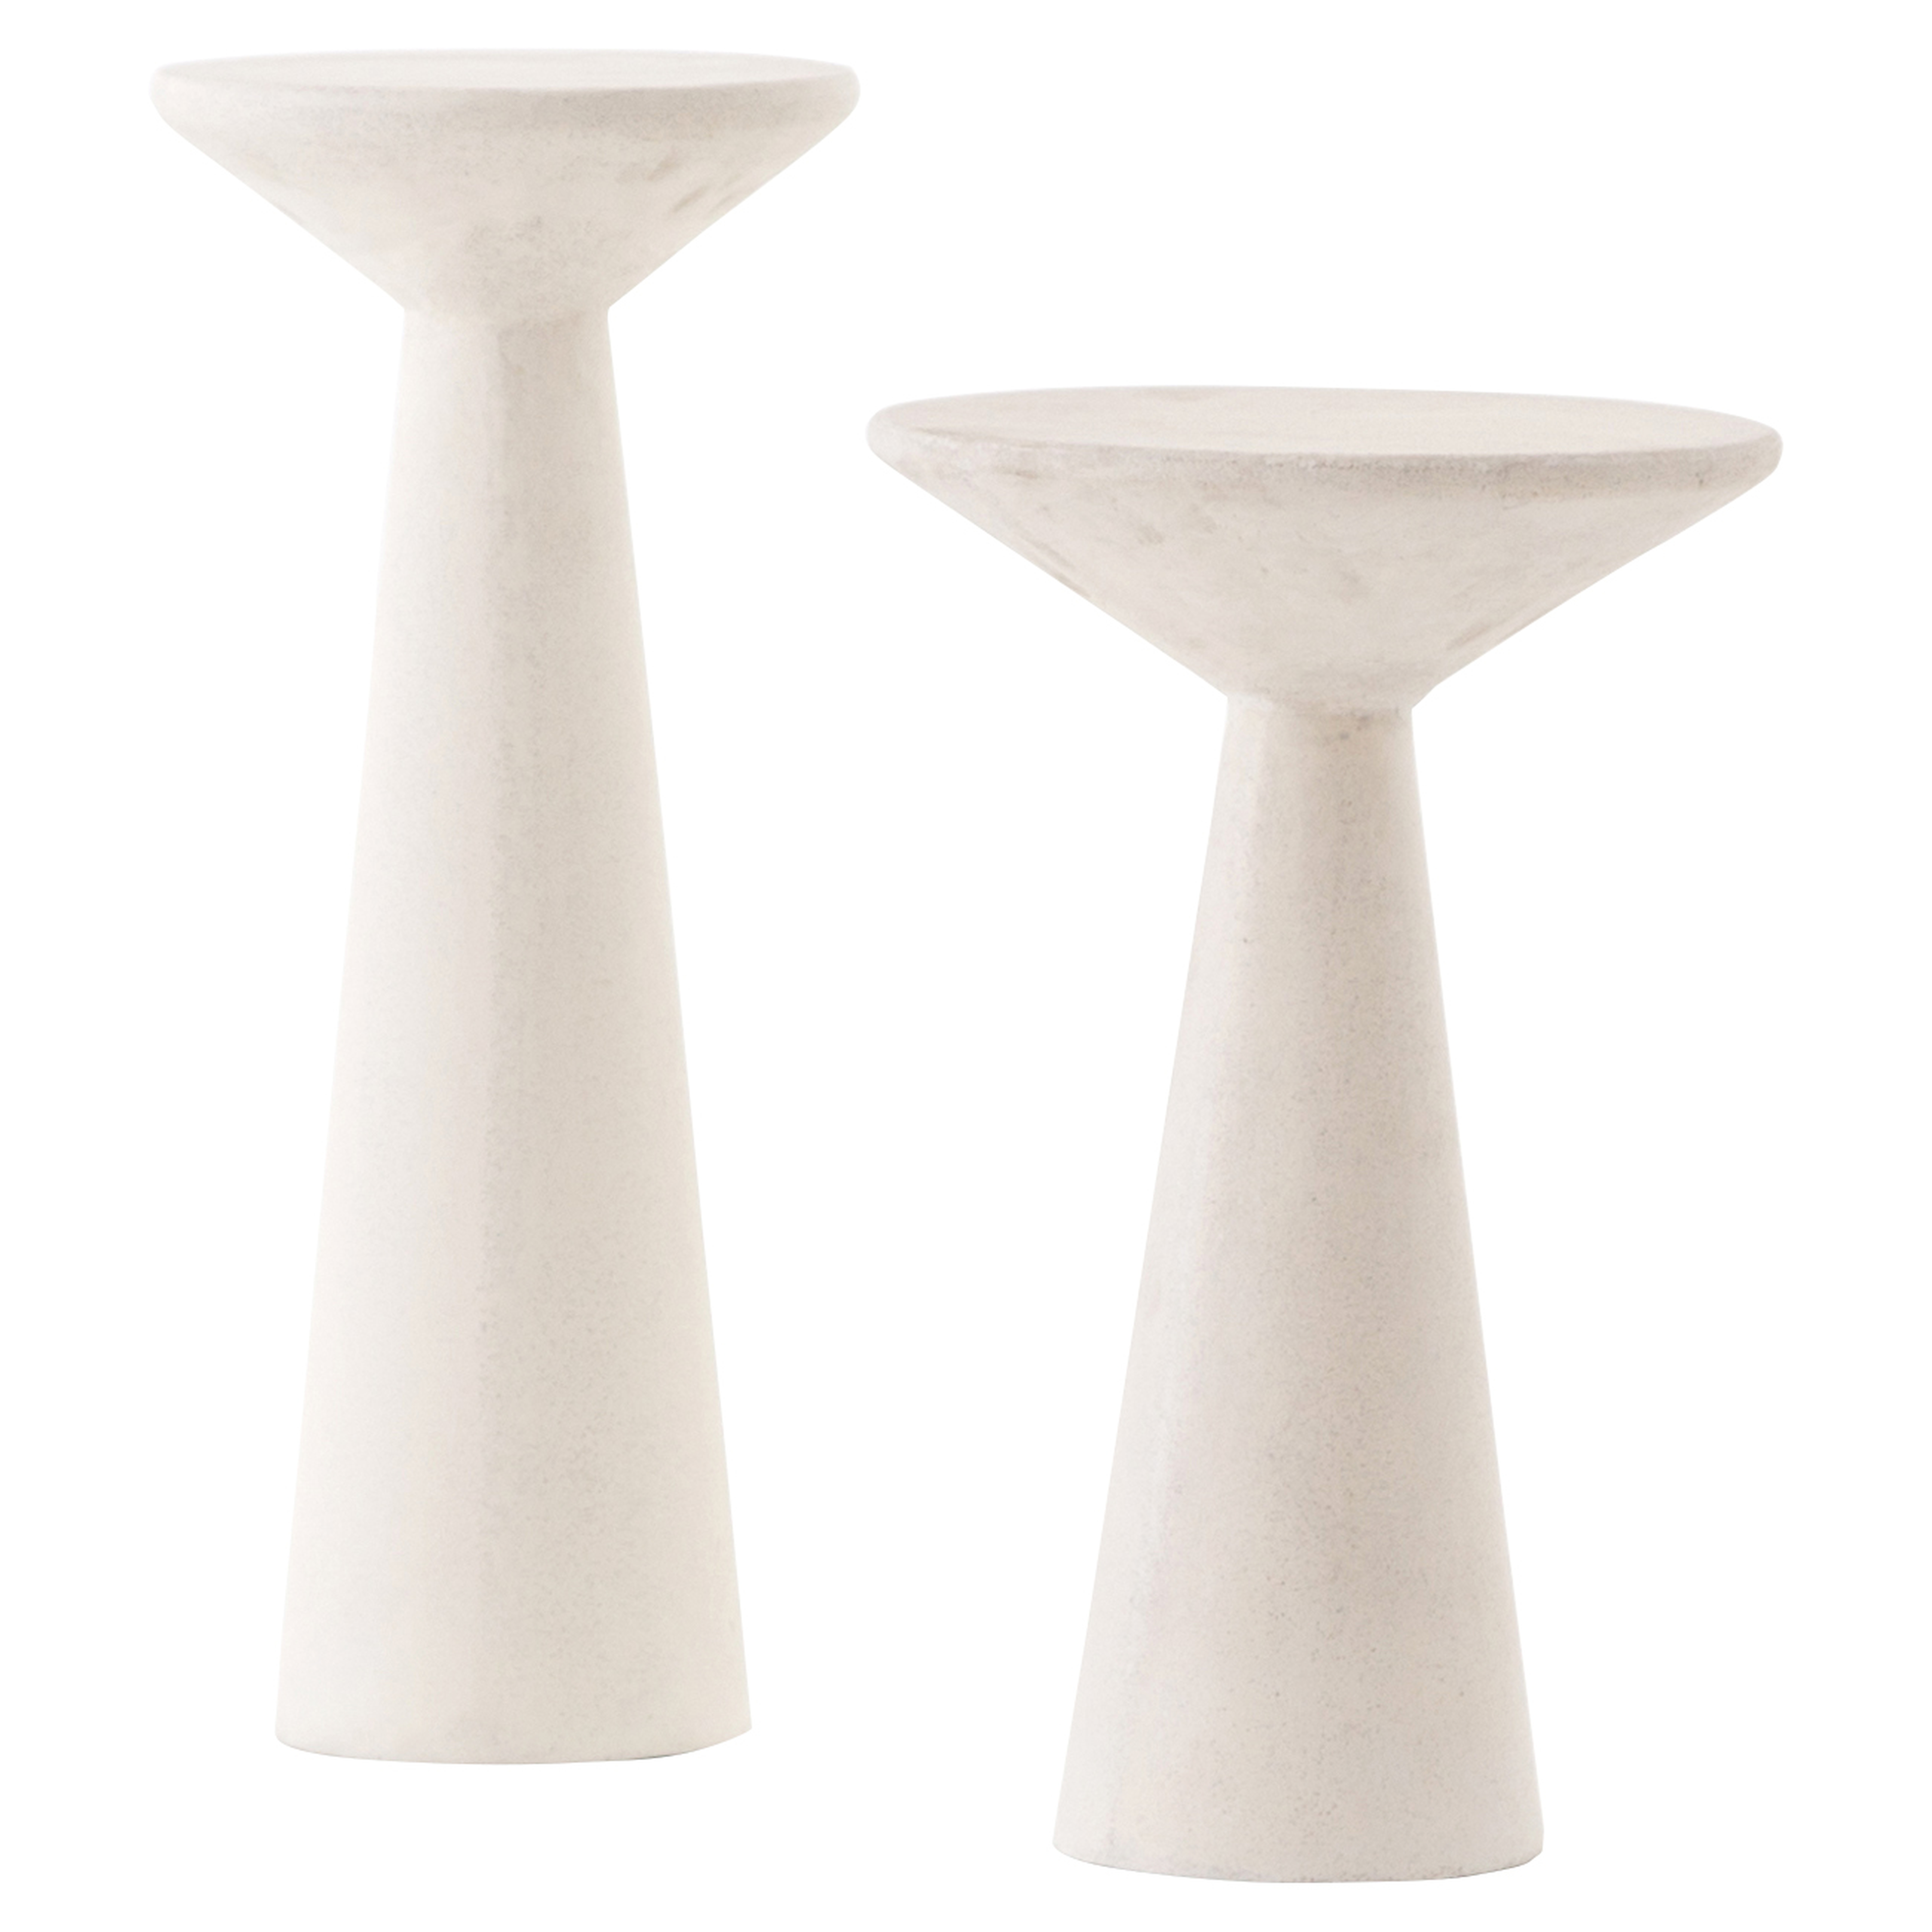 Mika Industrial Bazaar White Concrete Pedestal Accent Tables - Set of 2 - Kathy Kuo Home